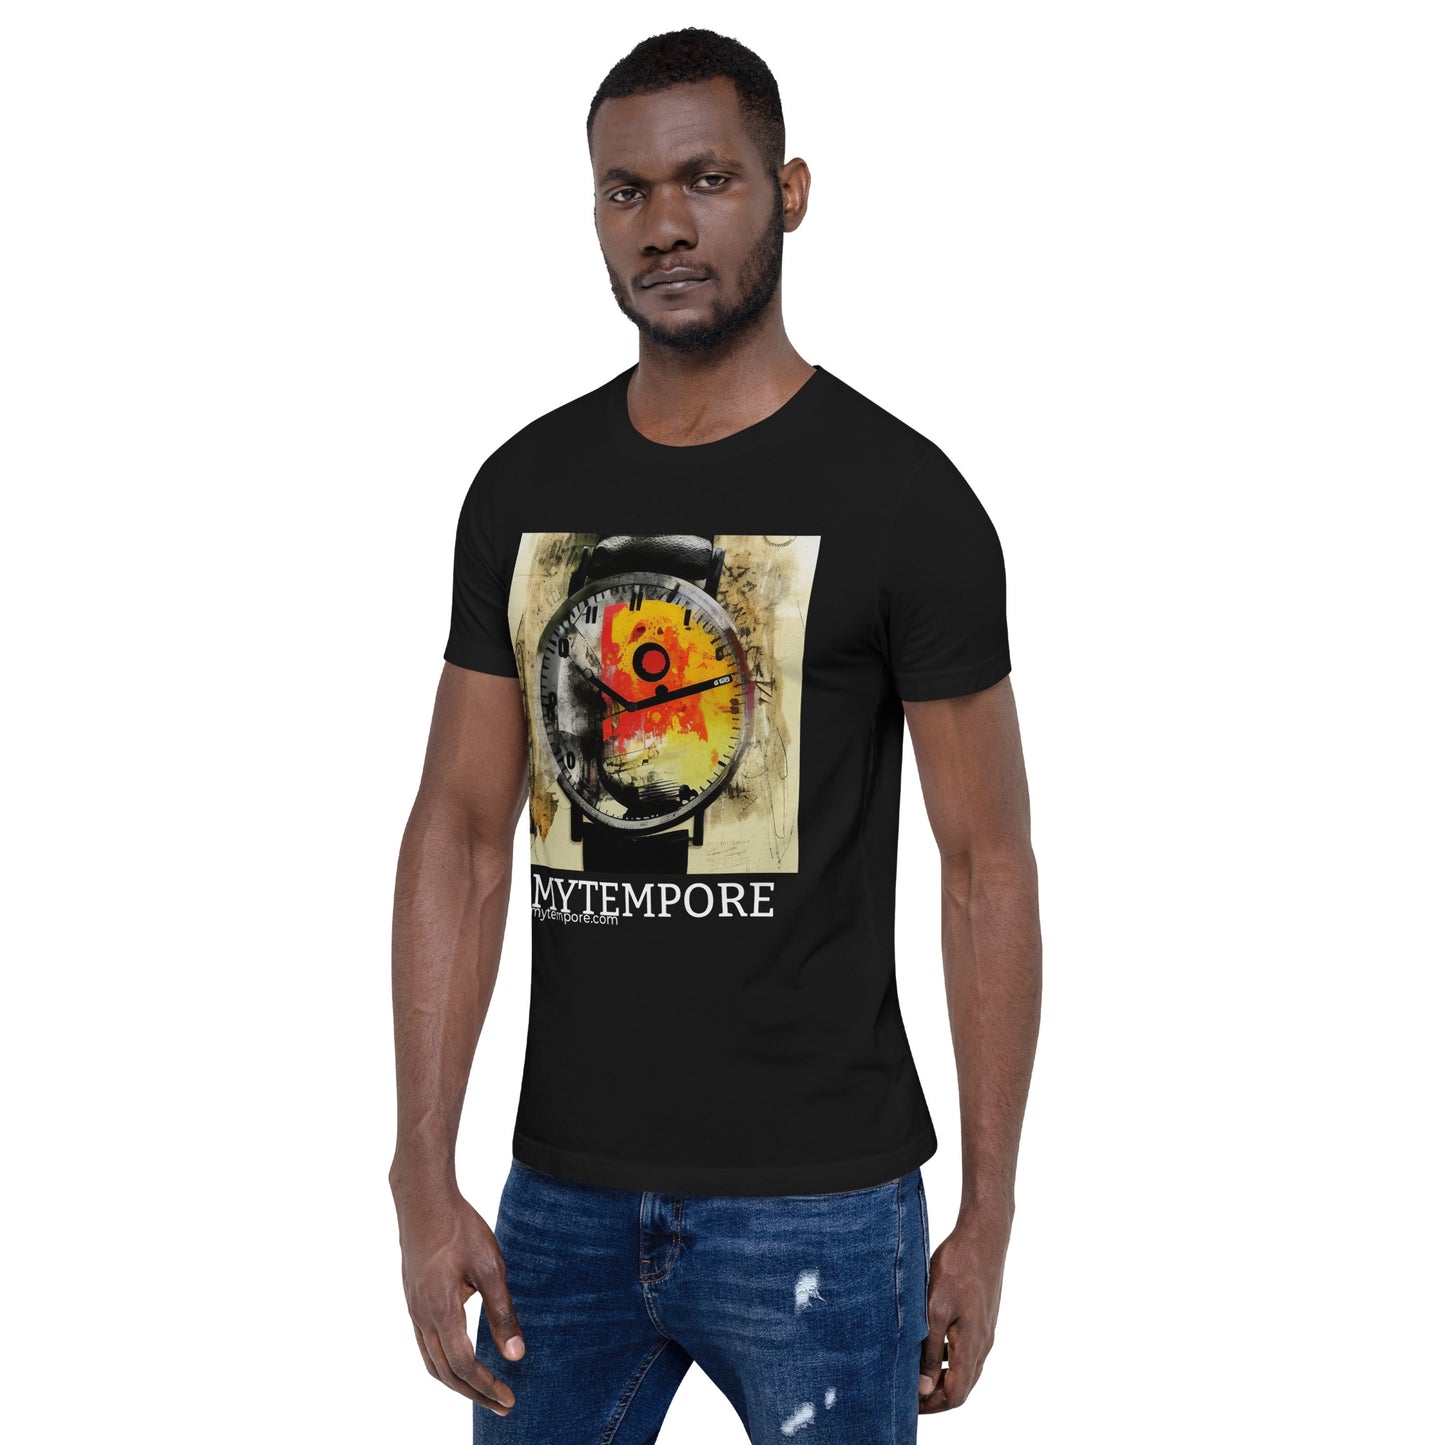 "MYTEMPORE" ABSTRACT TIME Unisex t-shirt